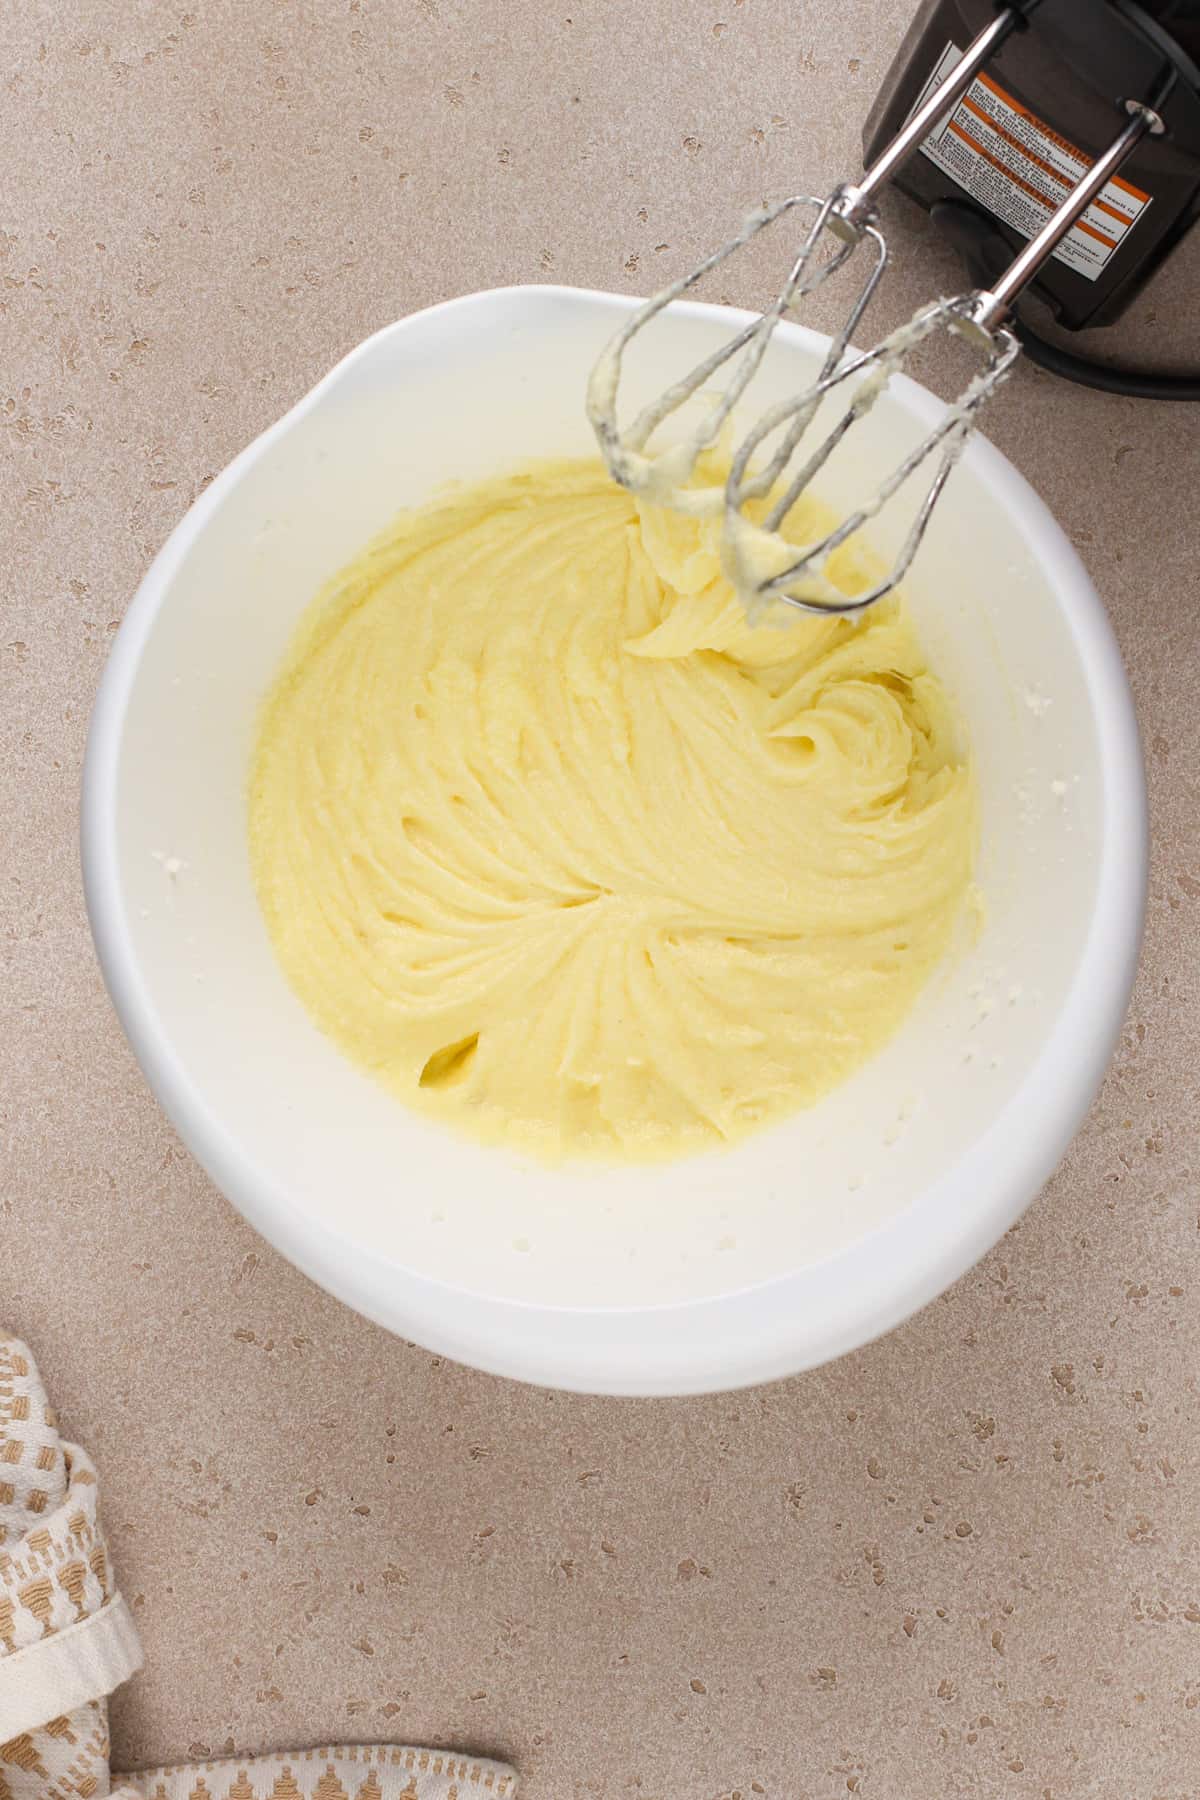 Butter, sugar, and eggs mixed together in a white mixing bowl.